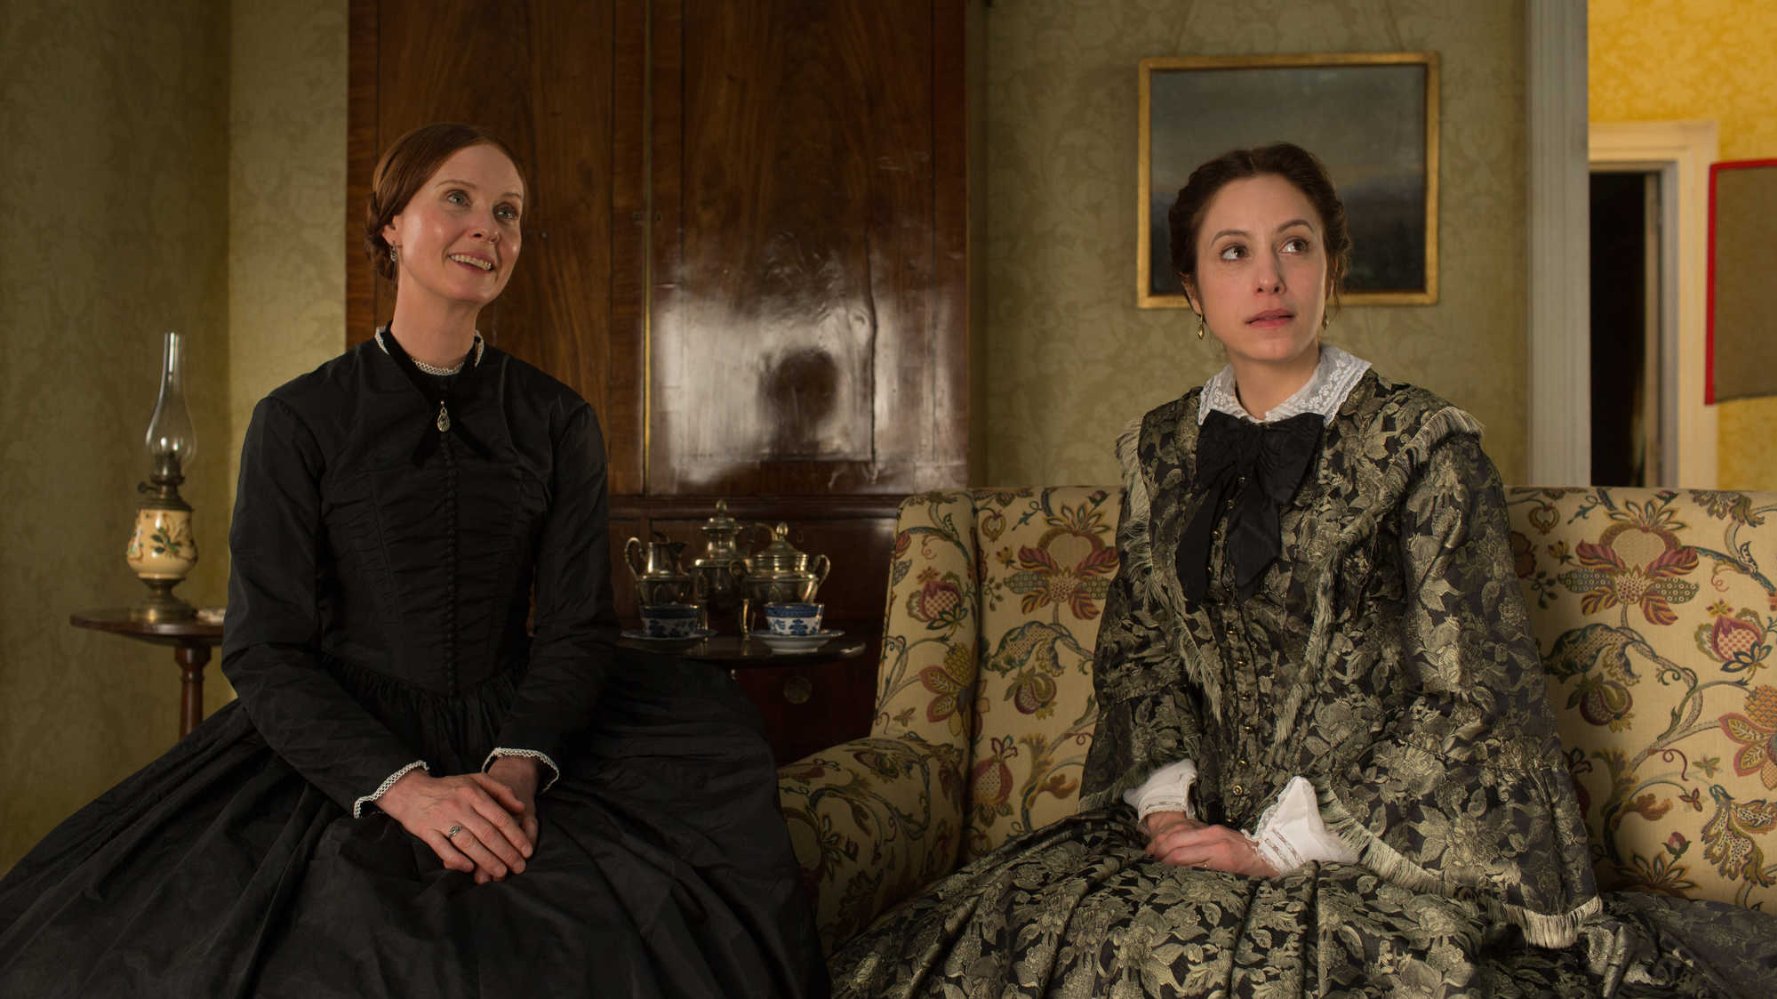 Watch A Quiet Passion